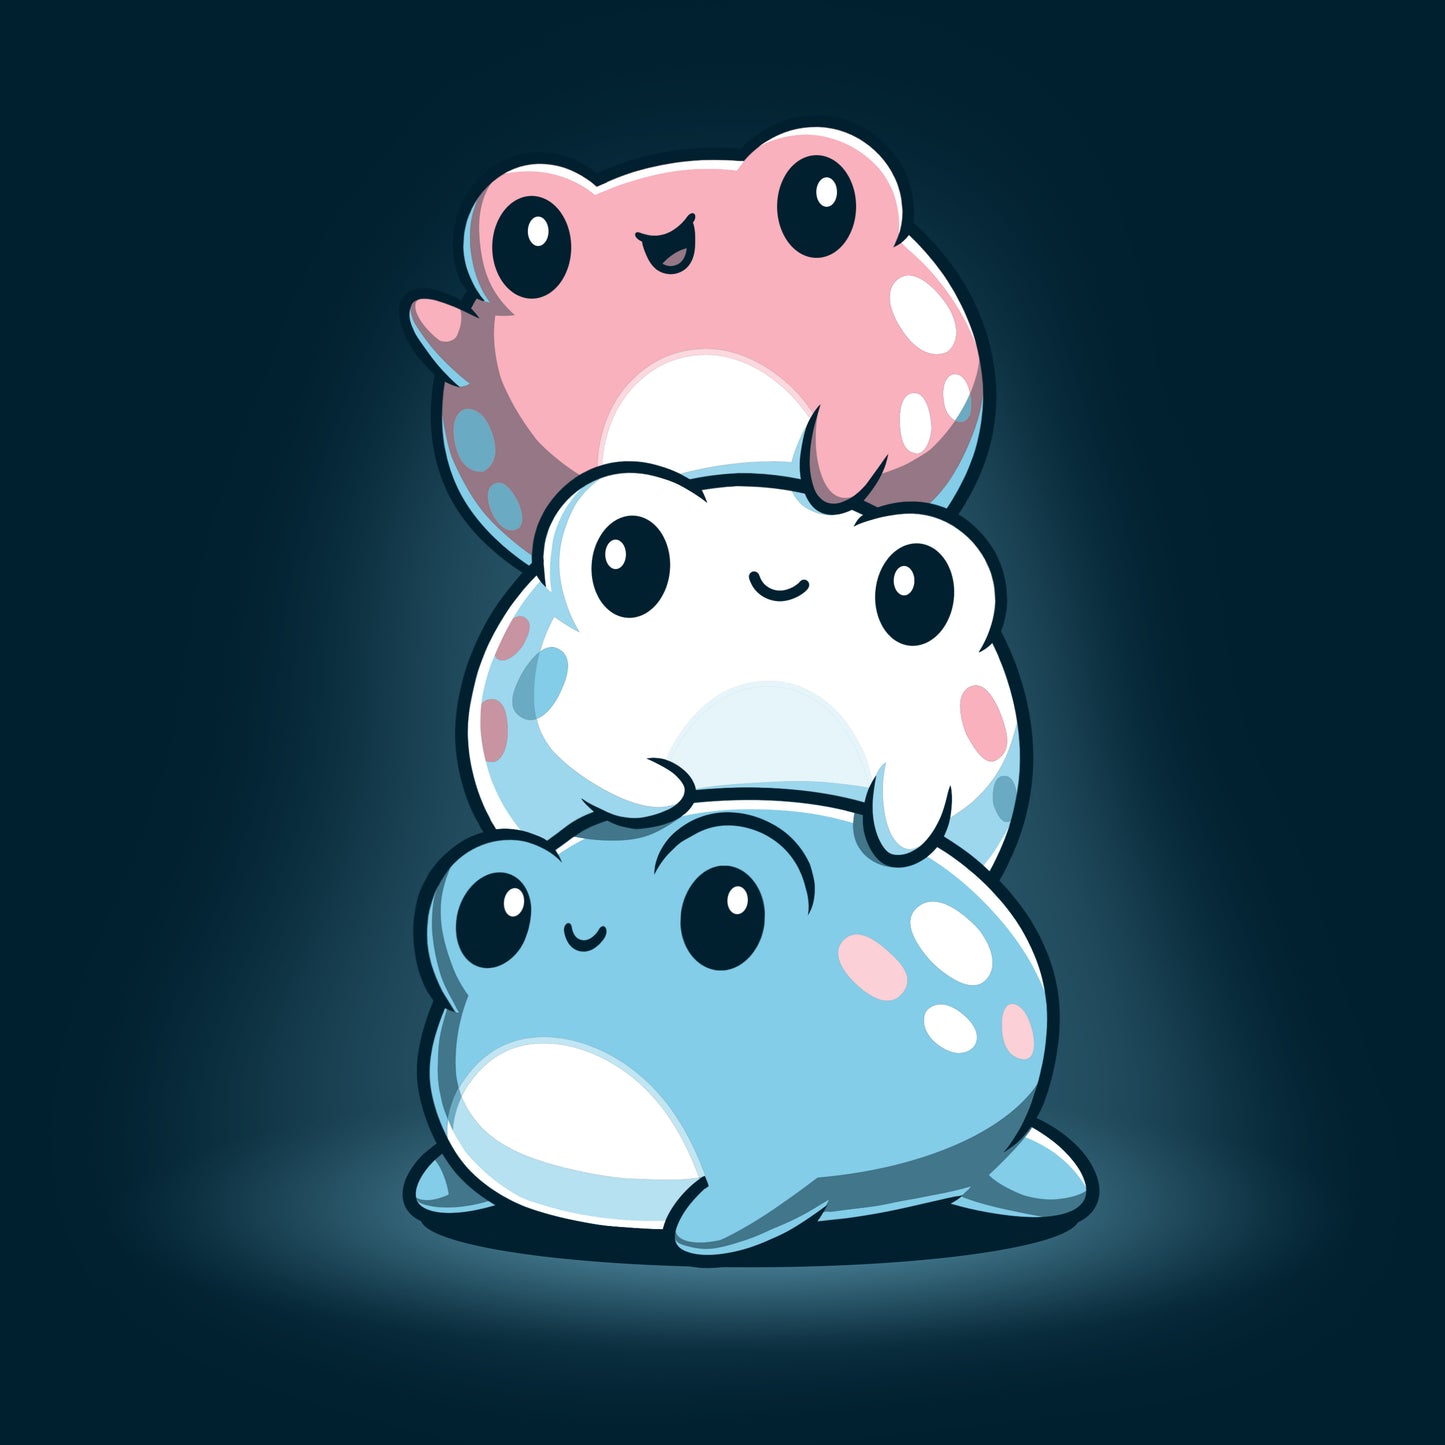 Three TeeTurtle trans pride frogs sitting on top of each other, wearing navy blue t-shirts.